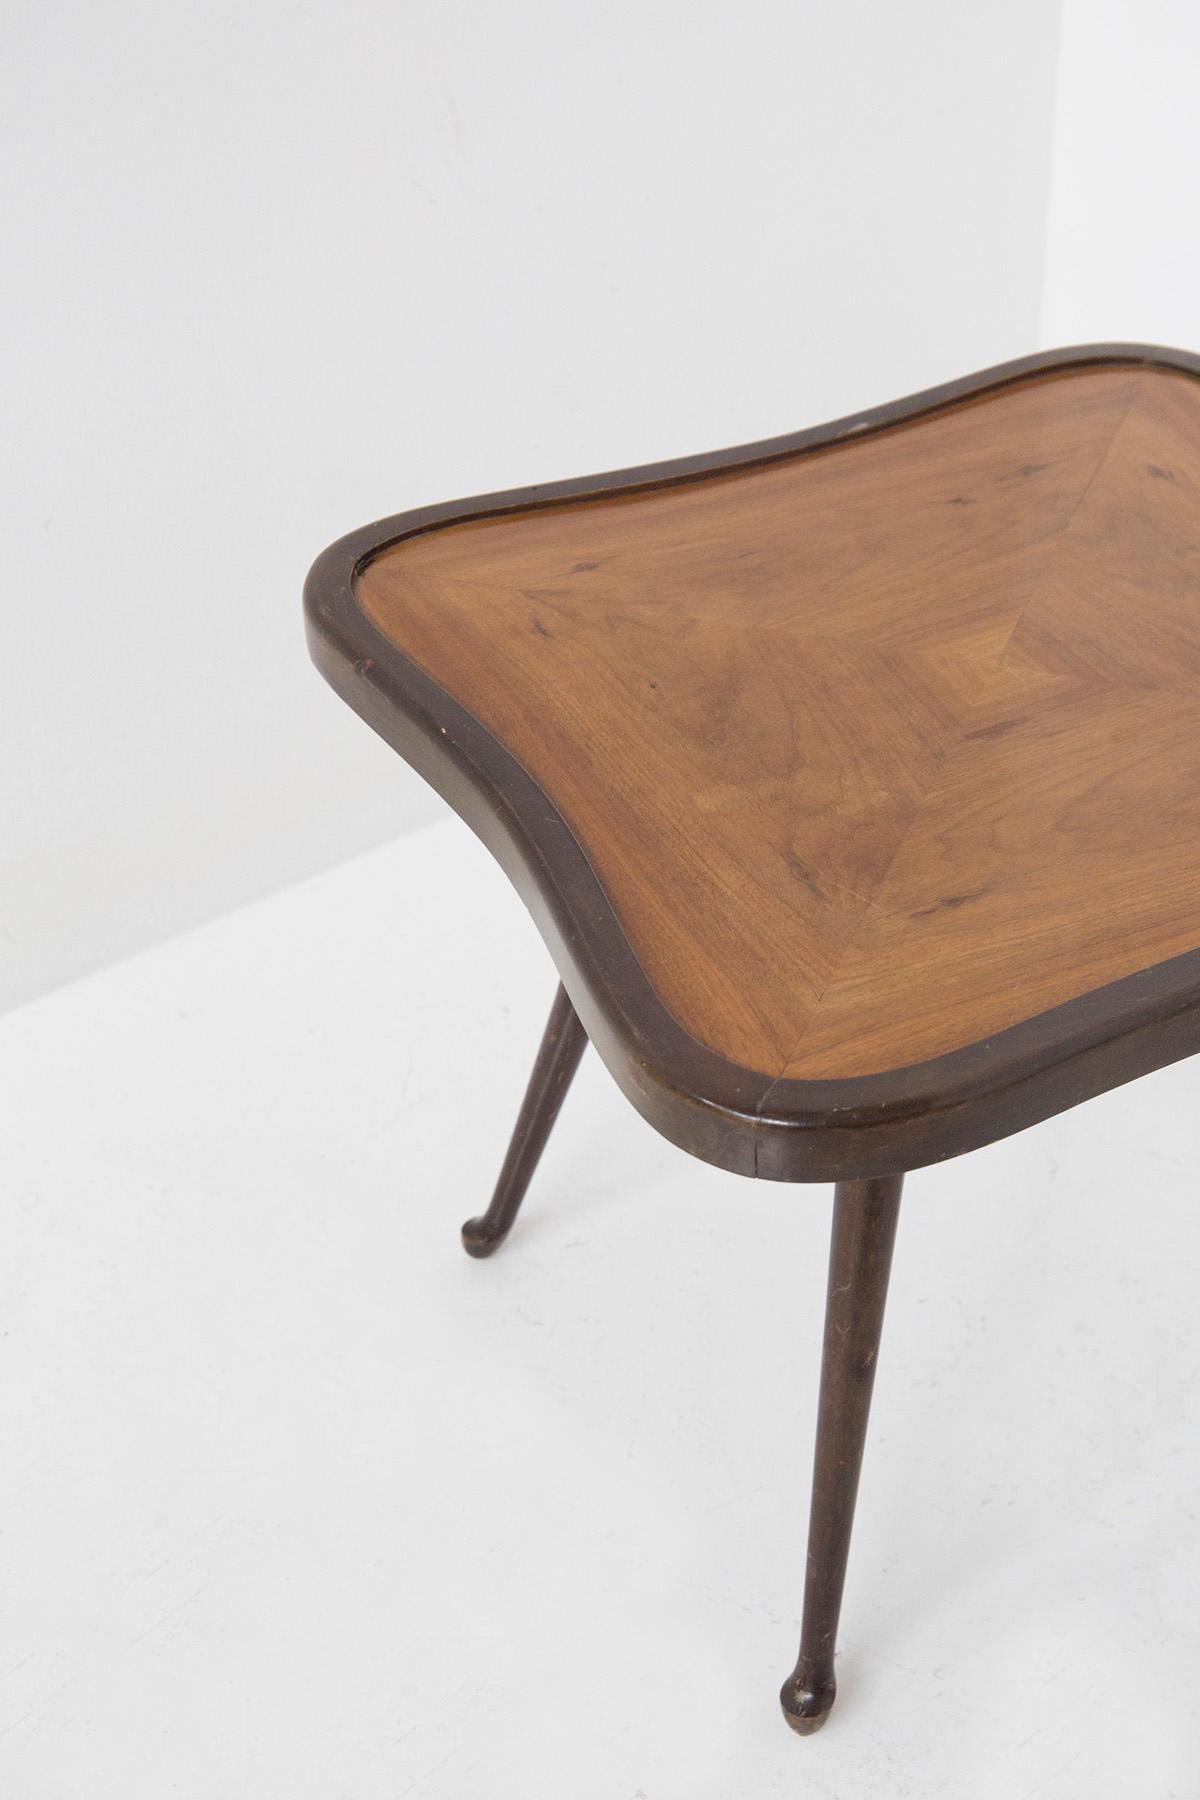 Very rare coffee table in various wood essences designed by designer Paolo Buffa of Italian production from the 1950s.
The coffee table is made of fine wood: the frame is dark, while the top is light.
The frame is made of very dark wood with four